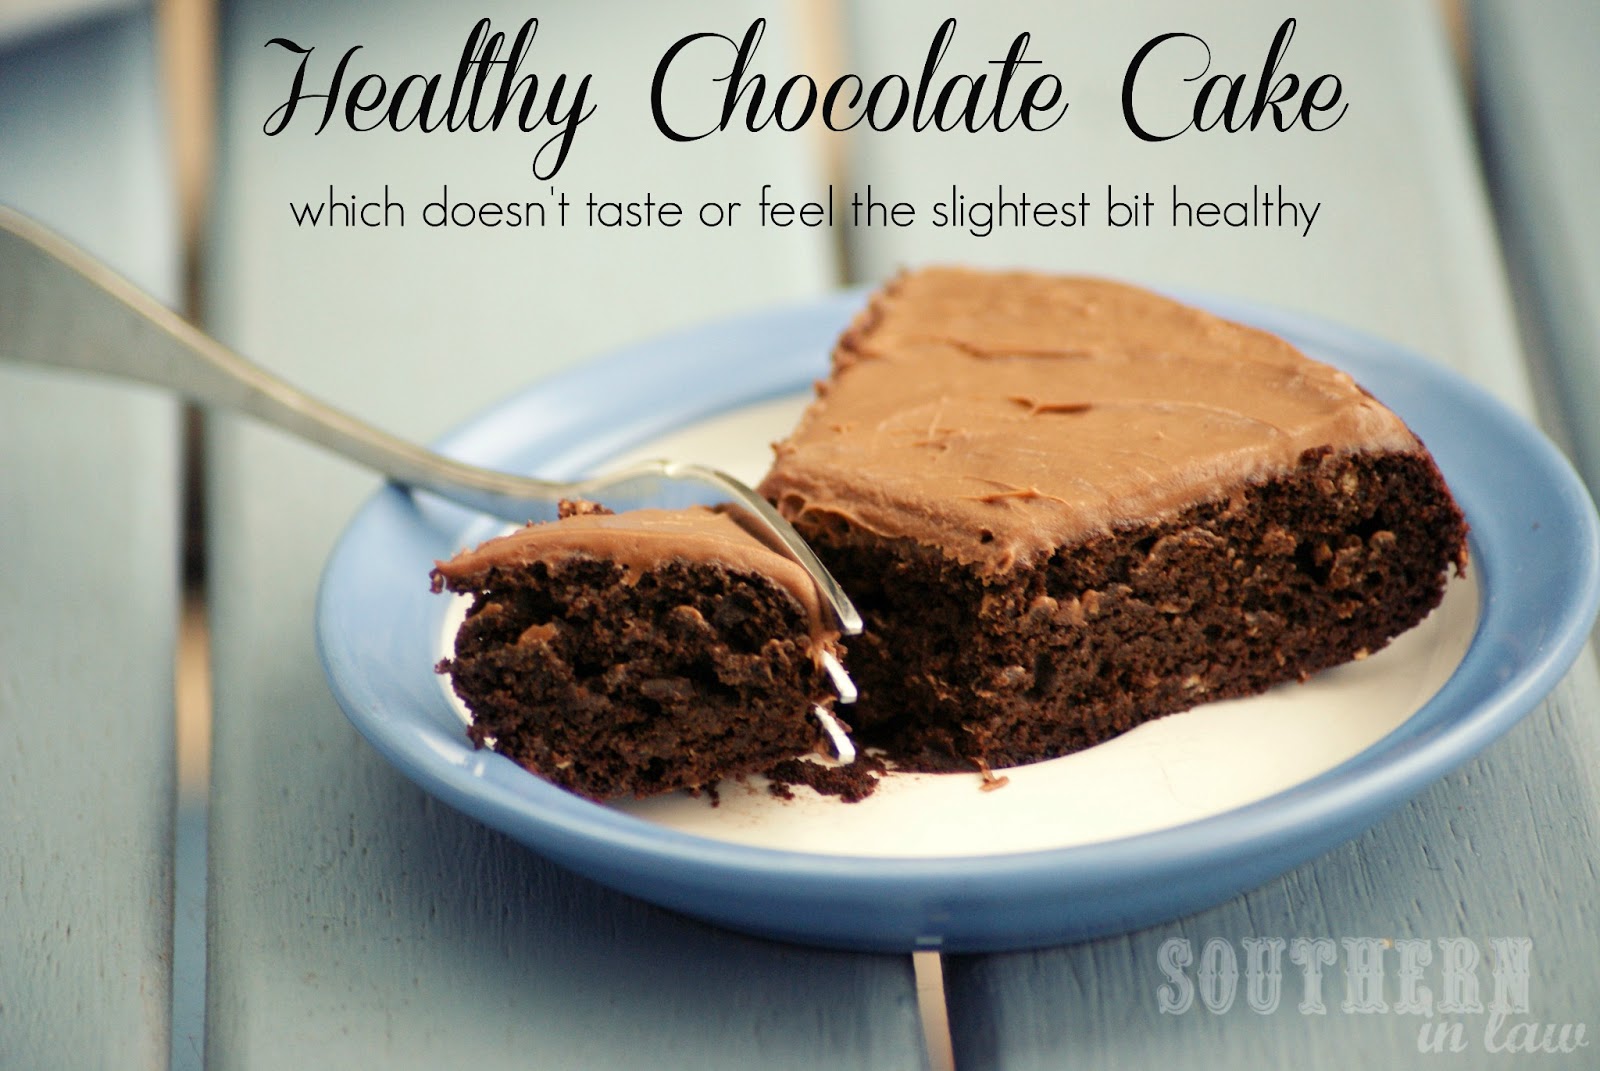 Southern In Law: Recipe: Healthy Chocolate Cake (Vegan too!)